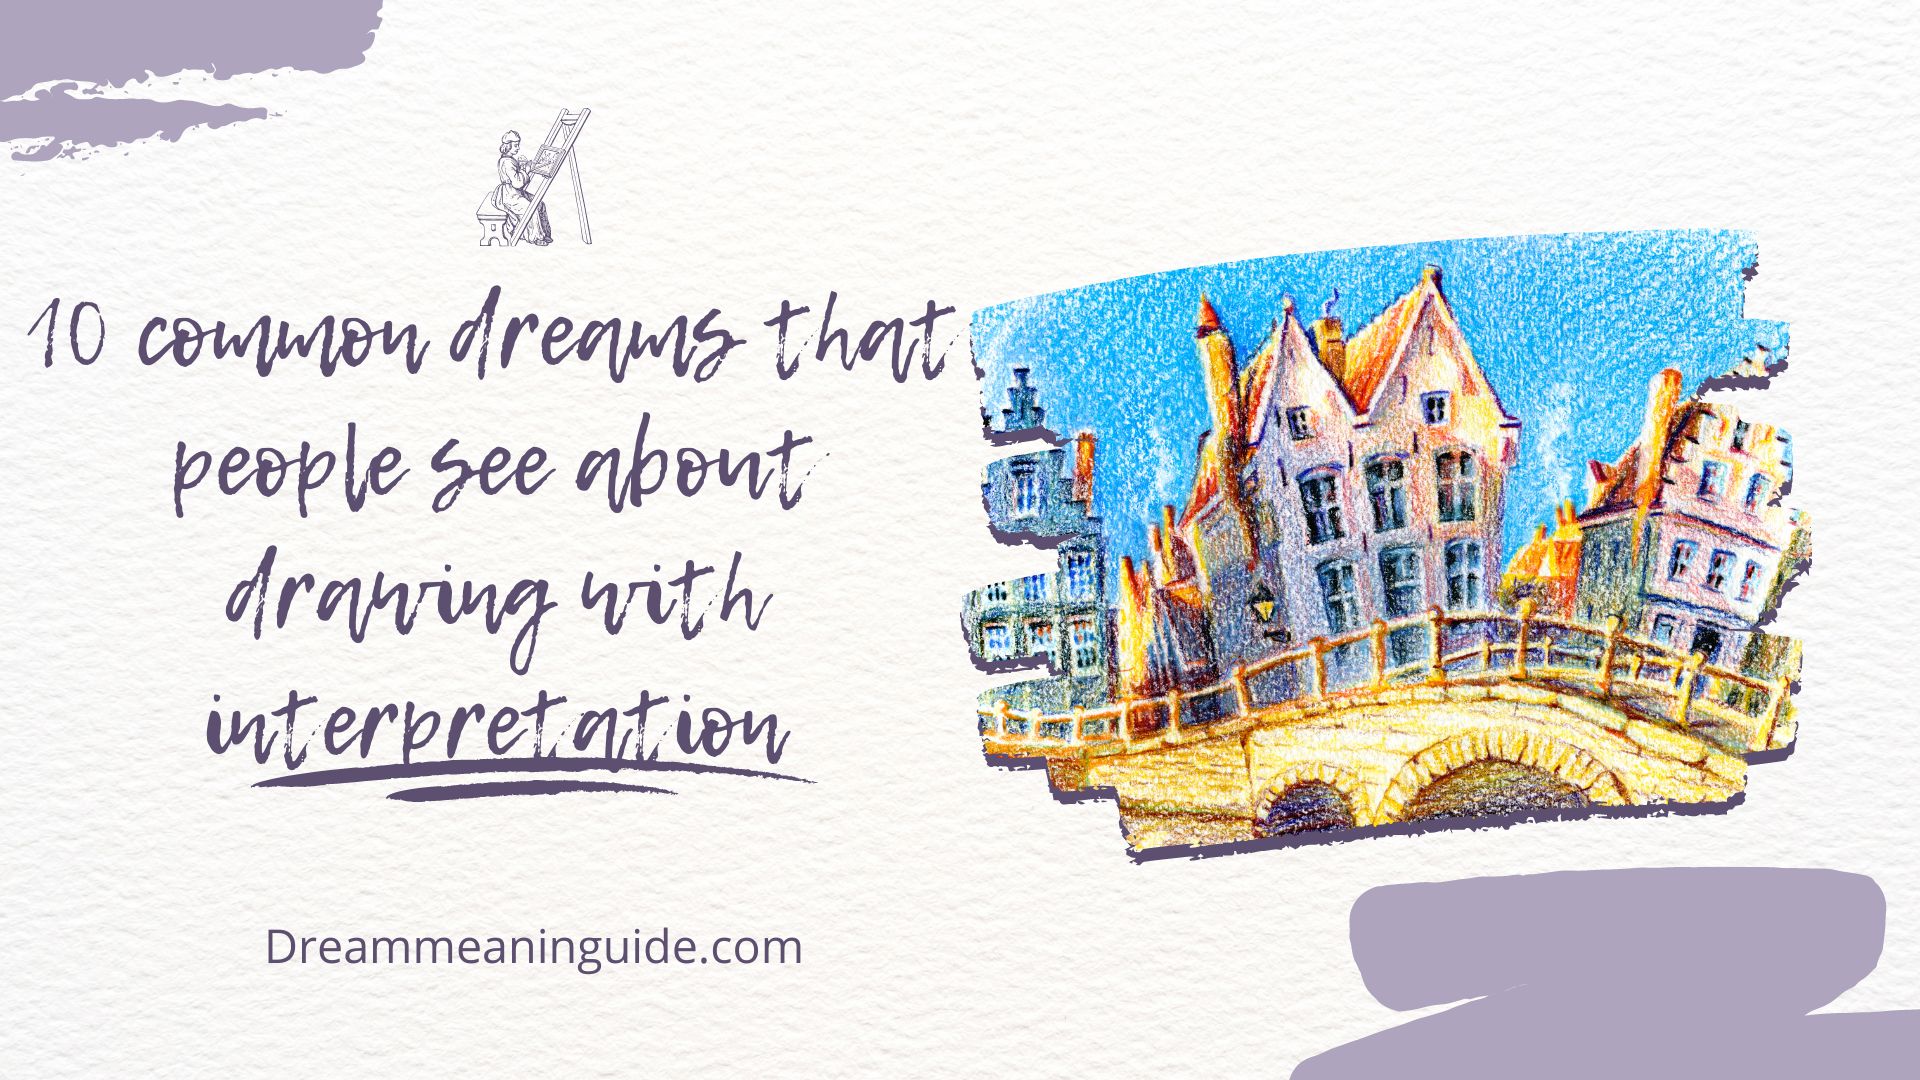 10 common dreams that people see about drawing with interpretation